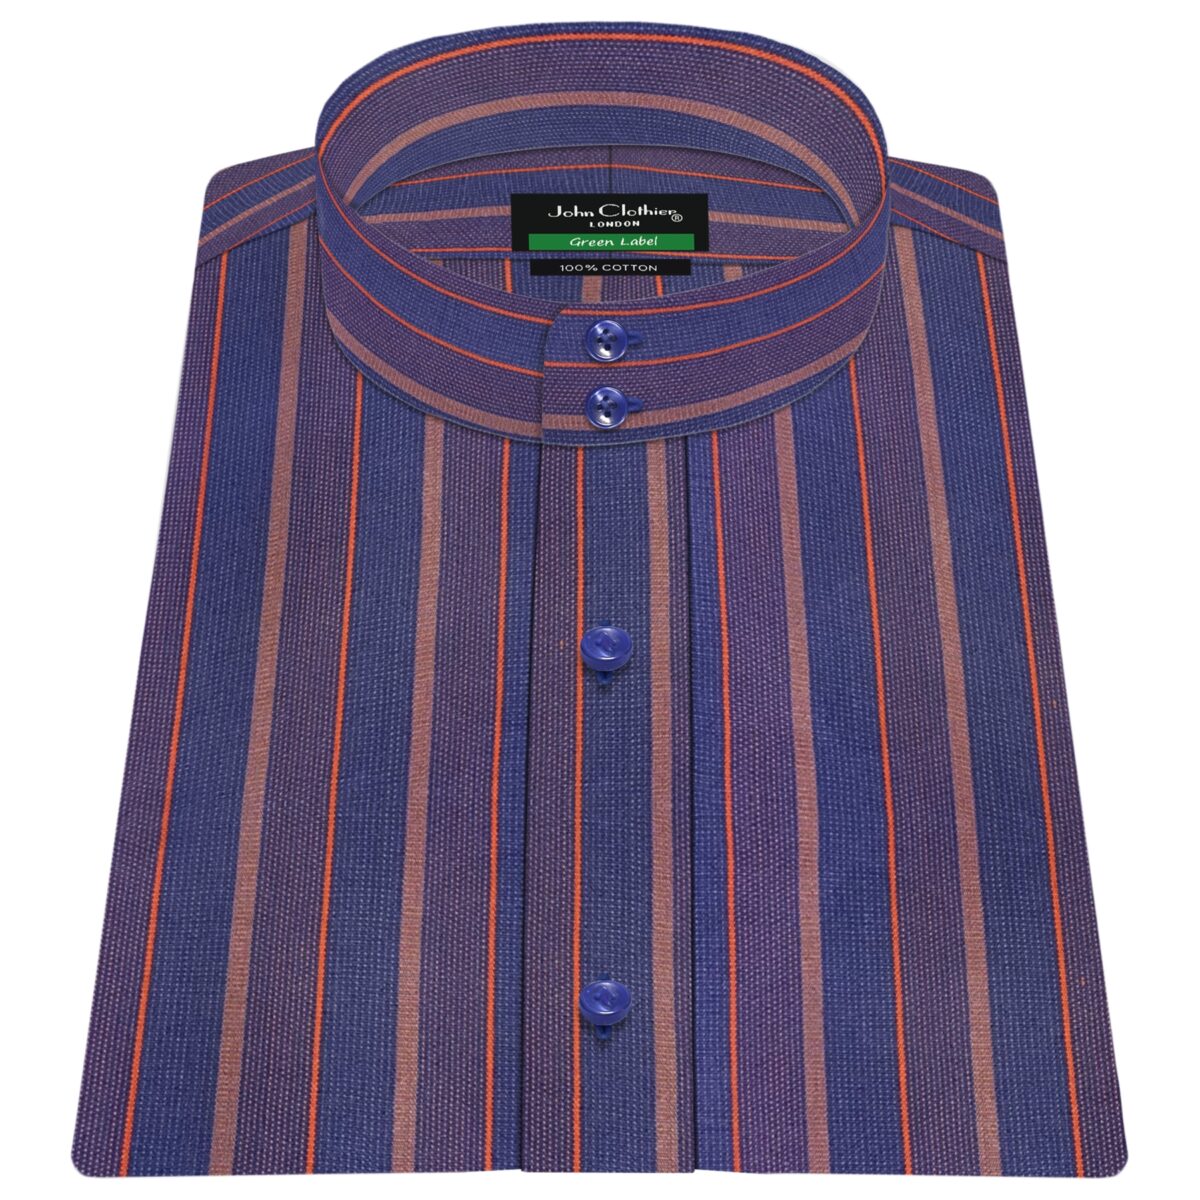 Orange Blue Multi Color High Band 2B Shirt, Men's 100% Cotton, made on order Chinese / Mandarin Collar. Shop from 31 different types of collars offered.